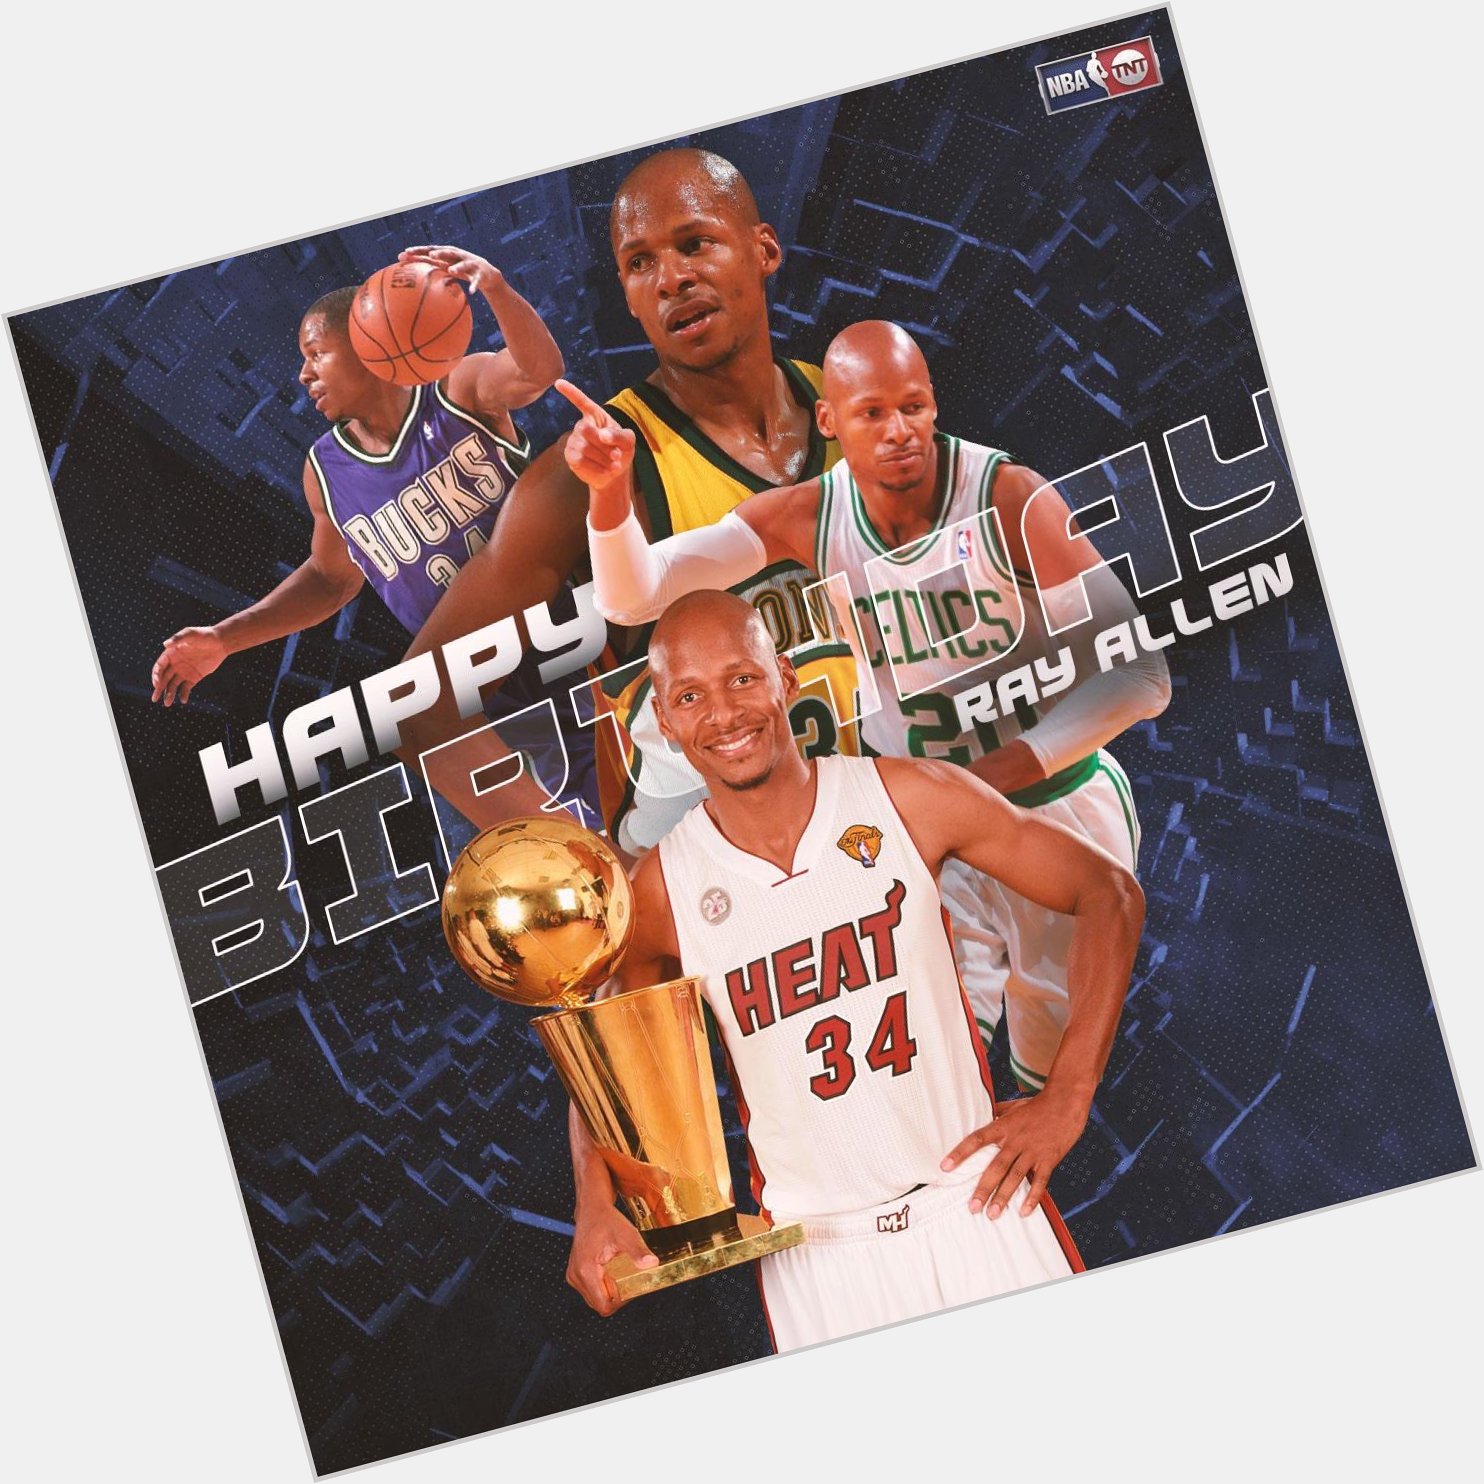 Happy Birthday to the 10-Time NBA All-Star & 2-Time NBA Champion, Ray Allen!  